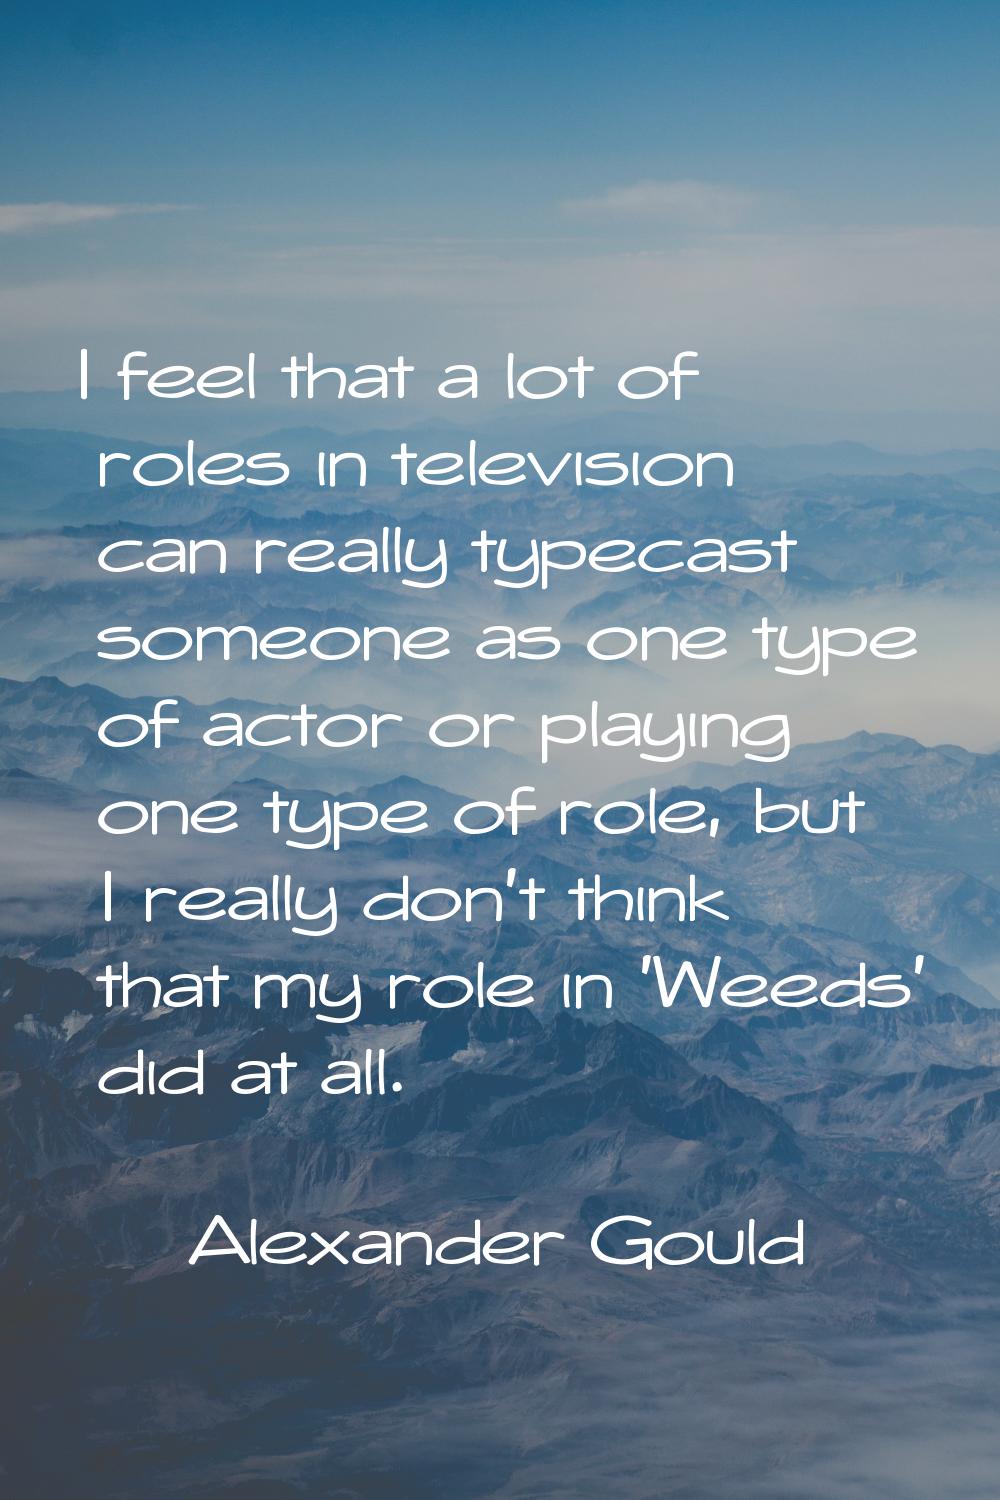 I feel that a lot of roles in television can really typecast someone as one type of actor or playin